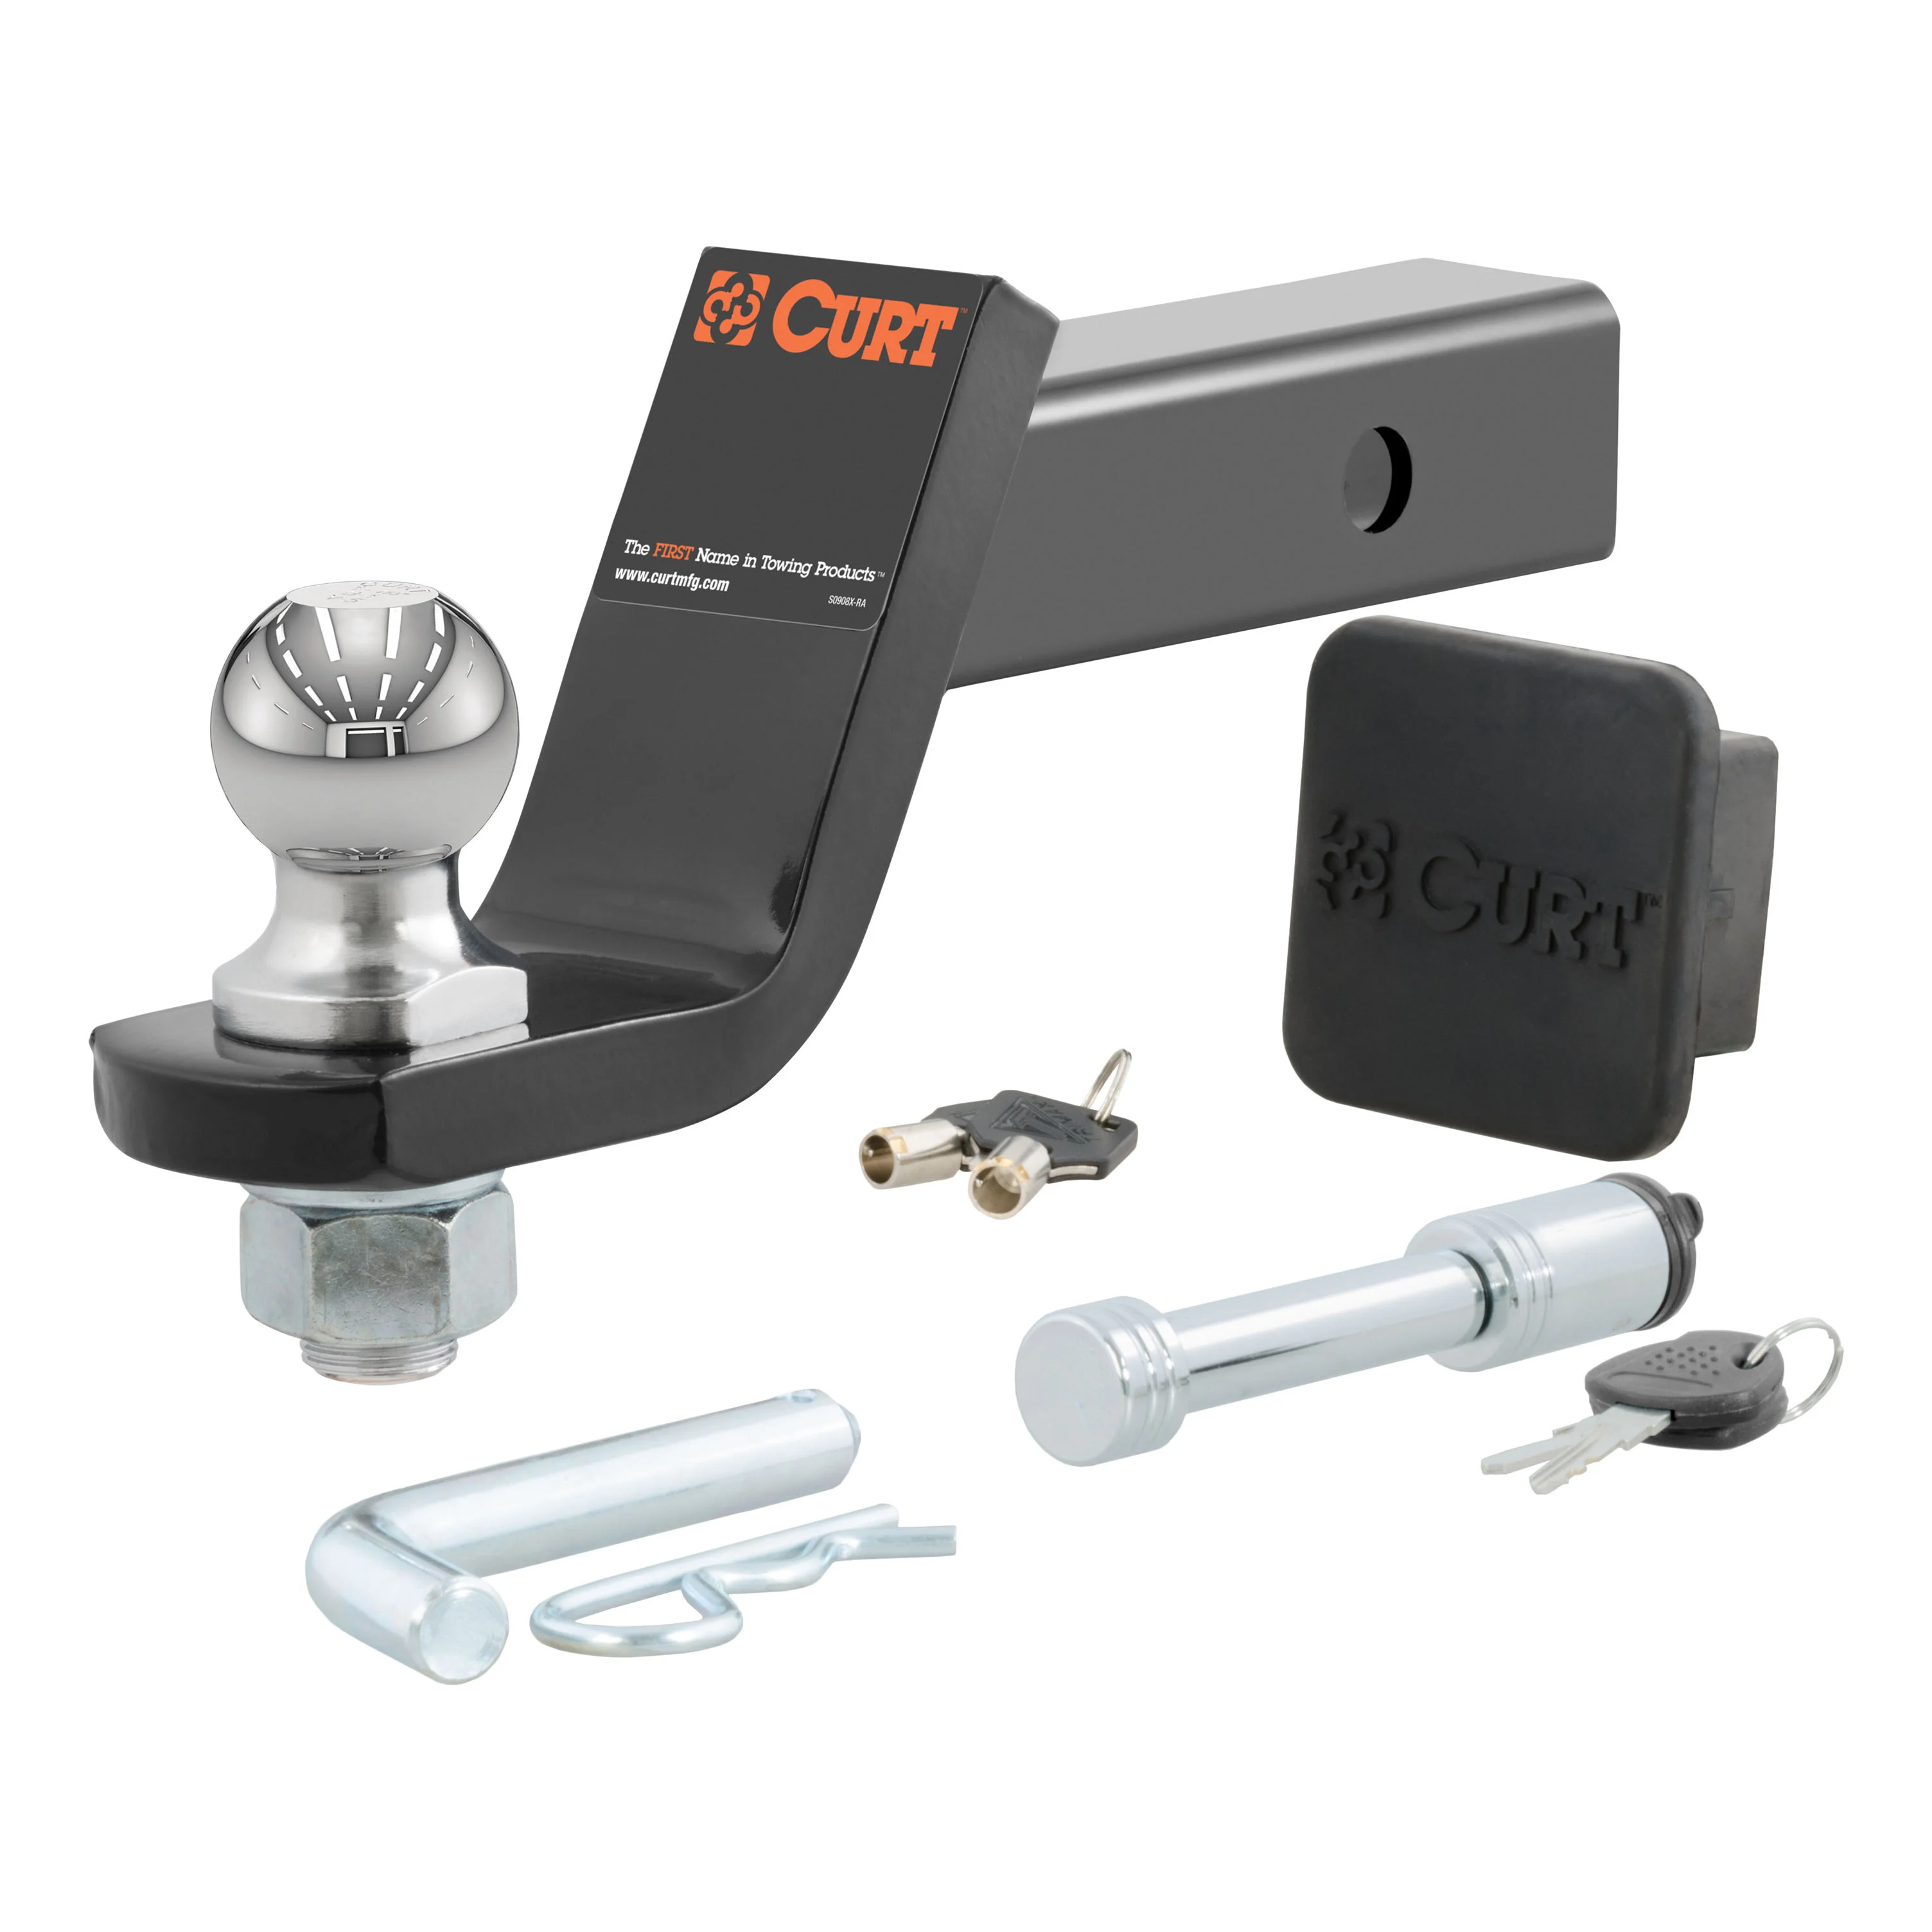 OEM 2019 Dodge Durango Curt Towing Starter Kit 2-inch ball, 2-inch shank with 4-inch drop (Part #68628506AA)